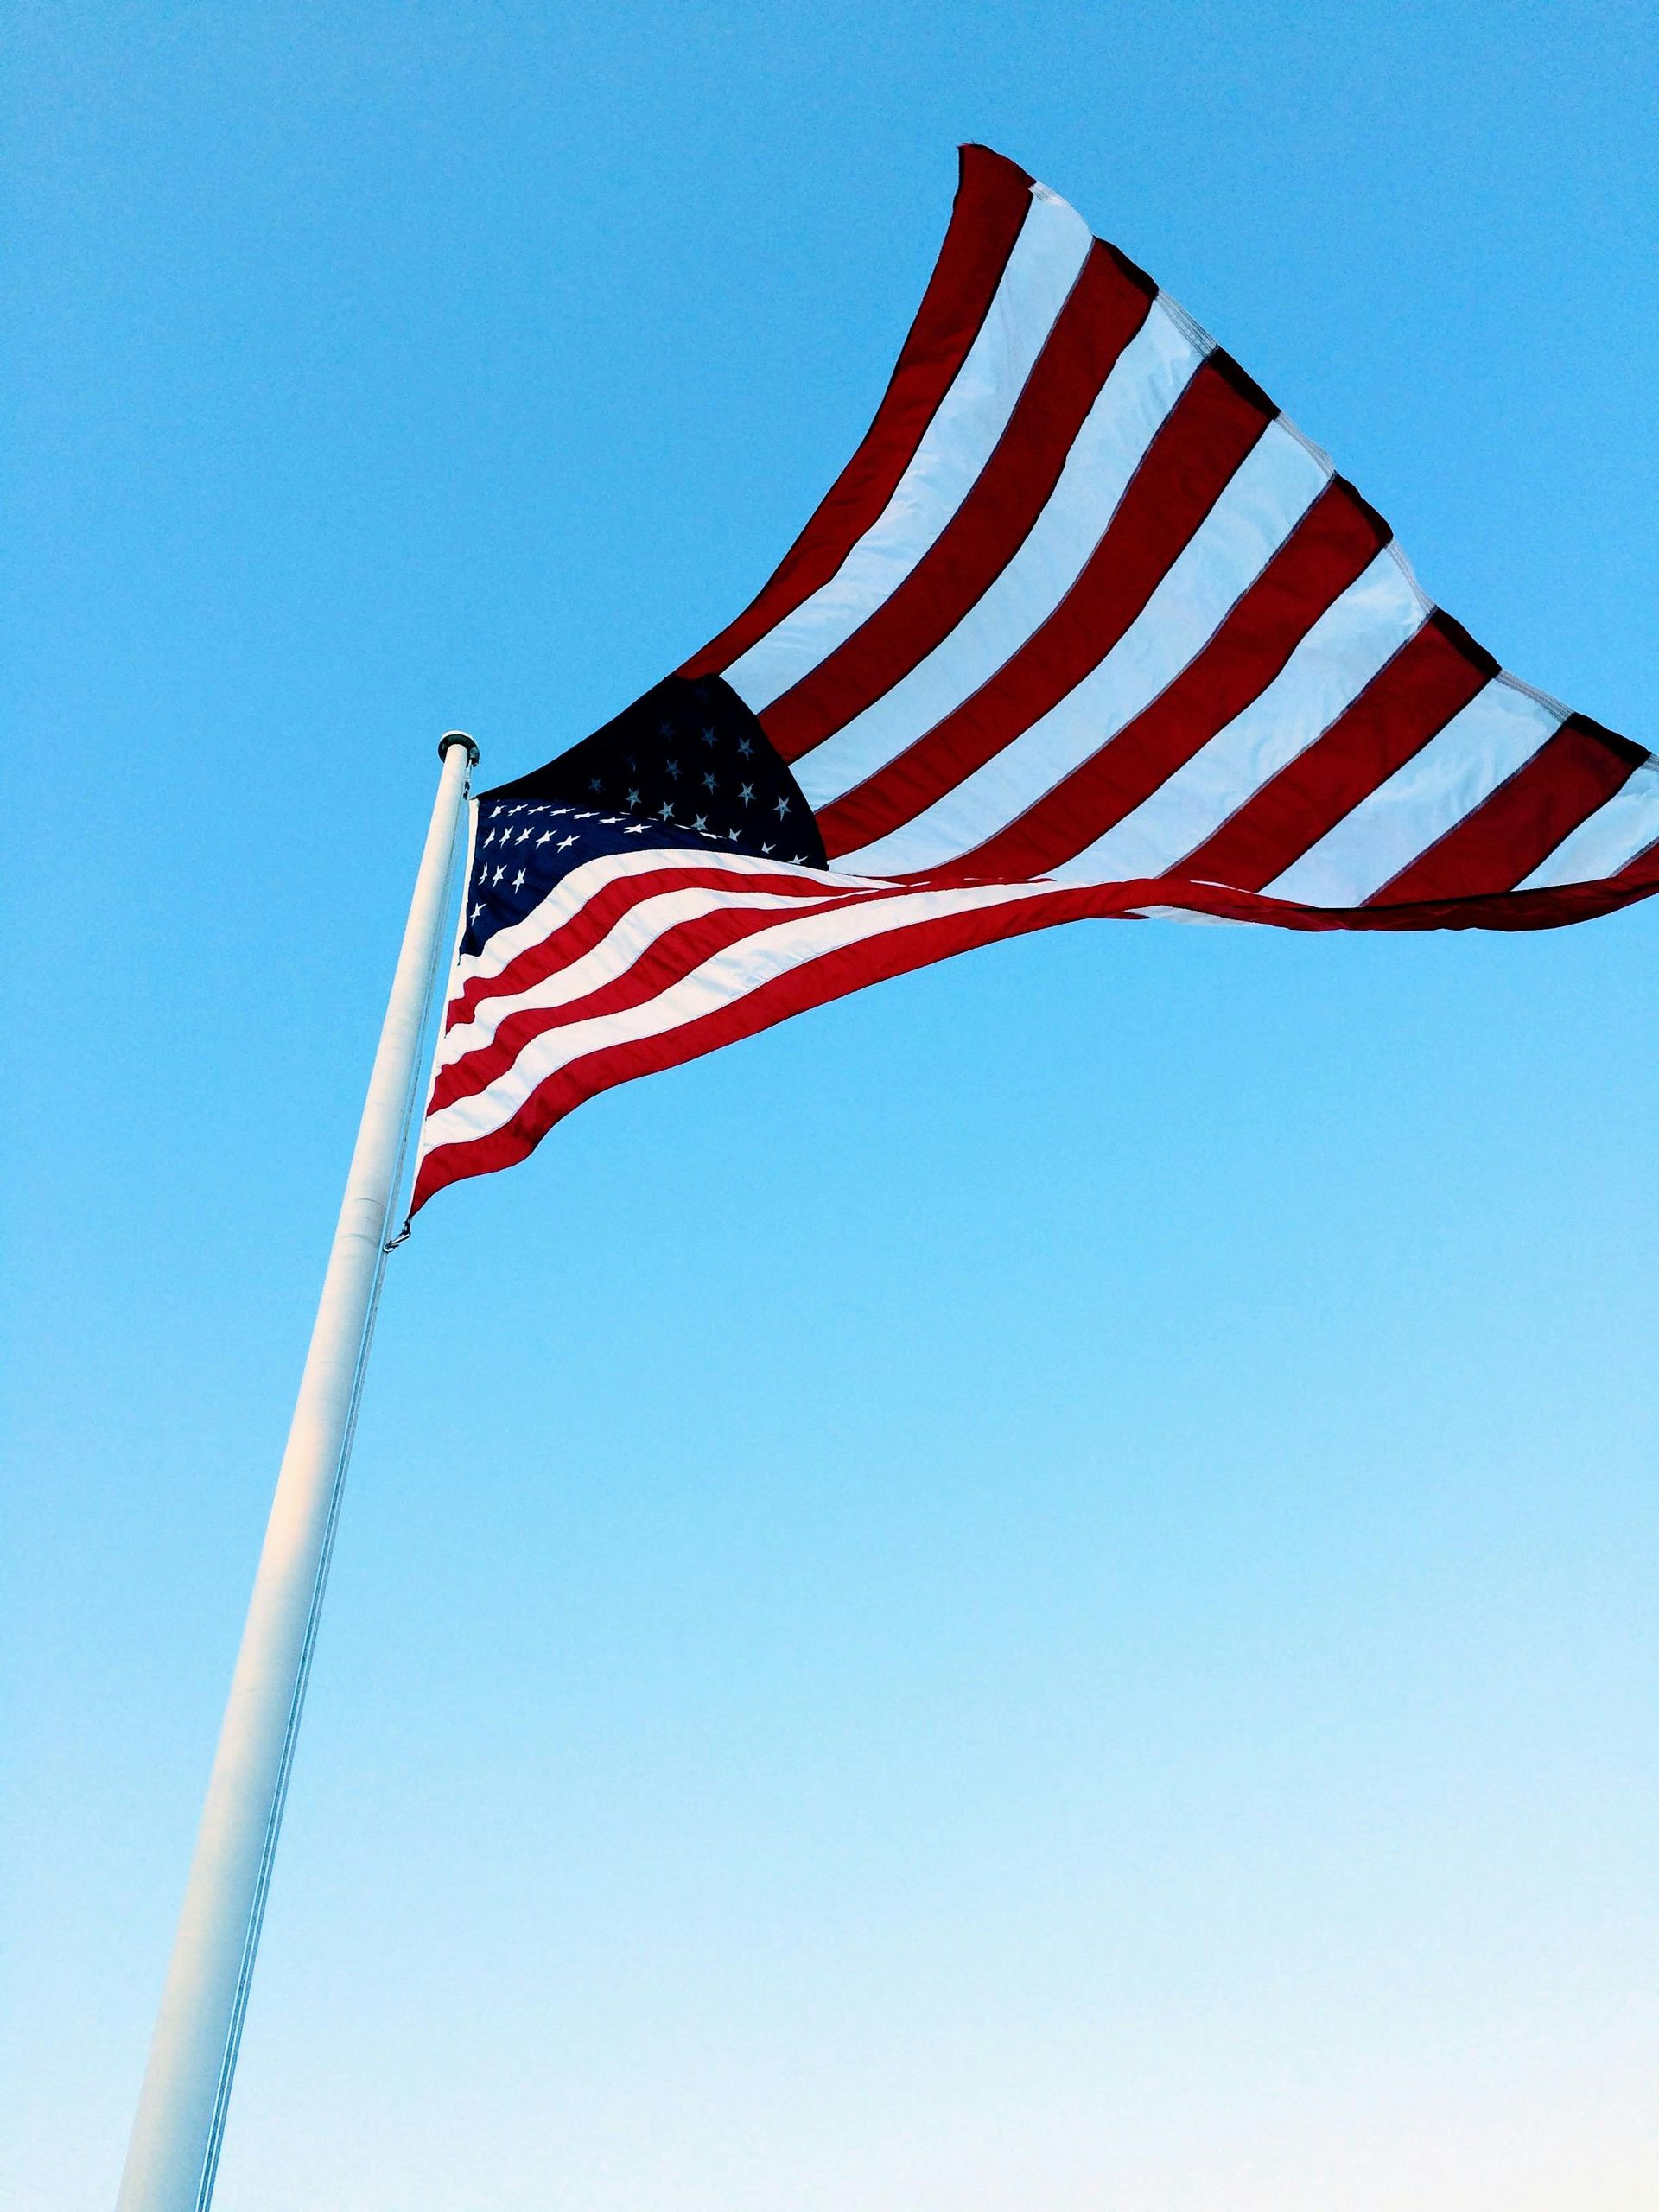 An american flag is flying in the wind against a blue sky